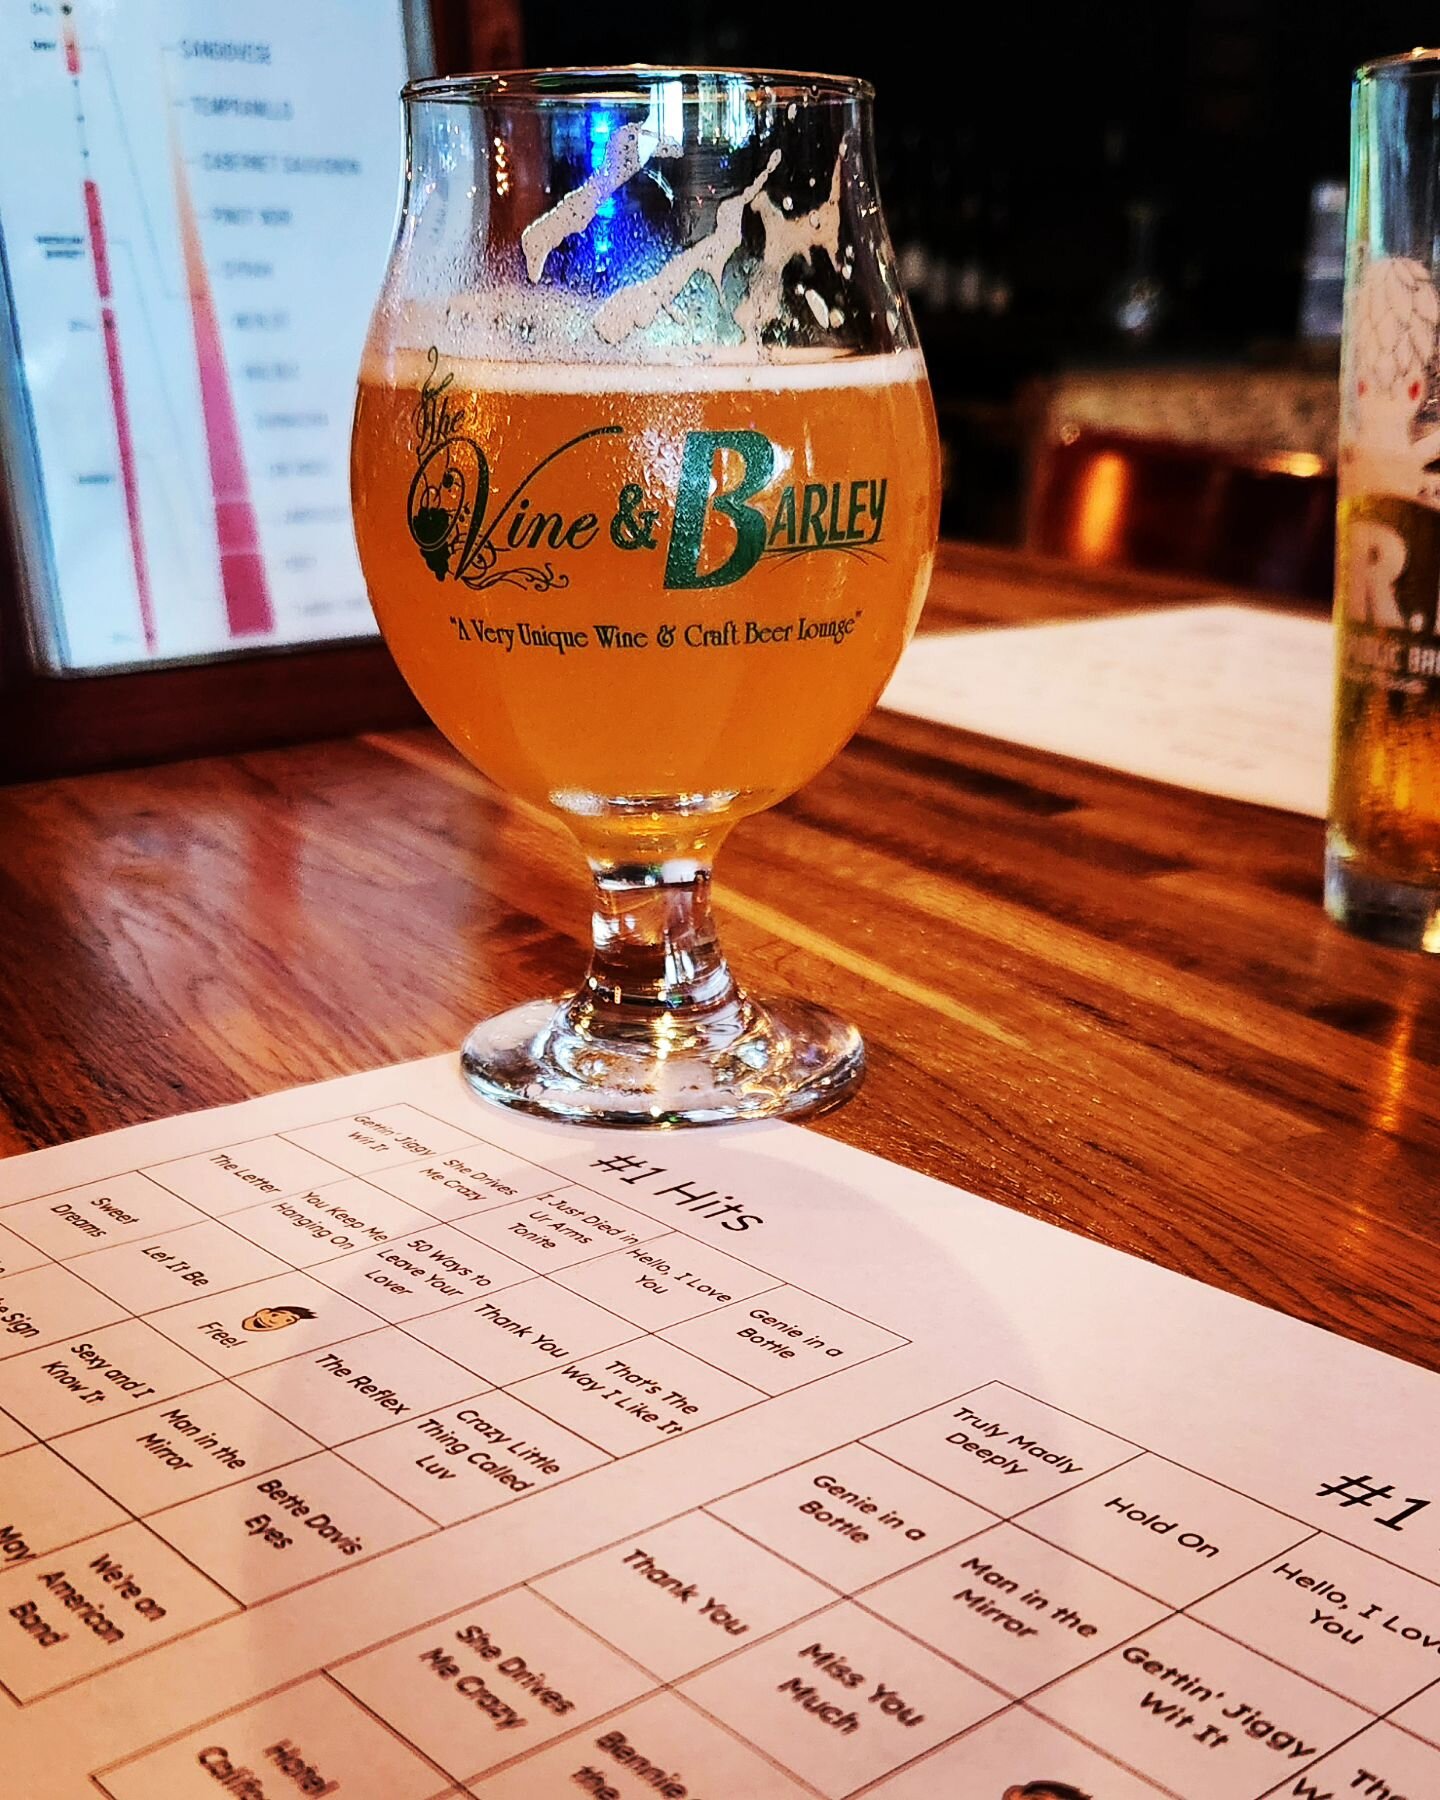 🎶🍻 Join us every Saturday evening at The Vine &amp; Barley for &quot;Music Bingo&quot; from 7 PM - 9 PM! 🎉 

Grab your friends, sip on some craft beer and wine, and get ready for a night of good tunes, great drinks, and awesome prizes! 🎁 

Don't 